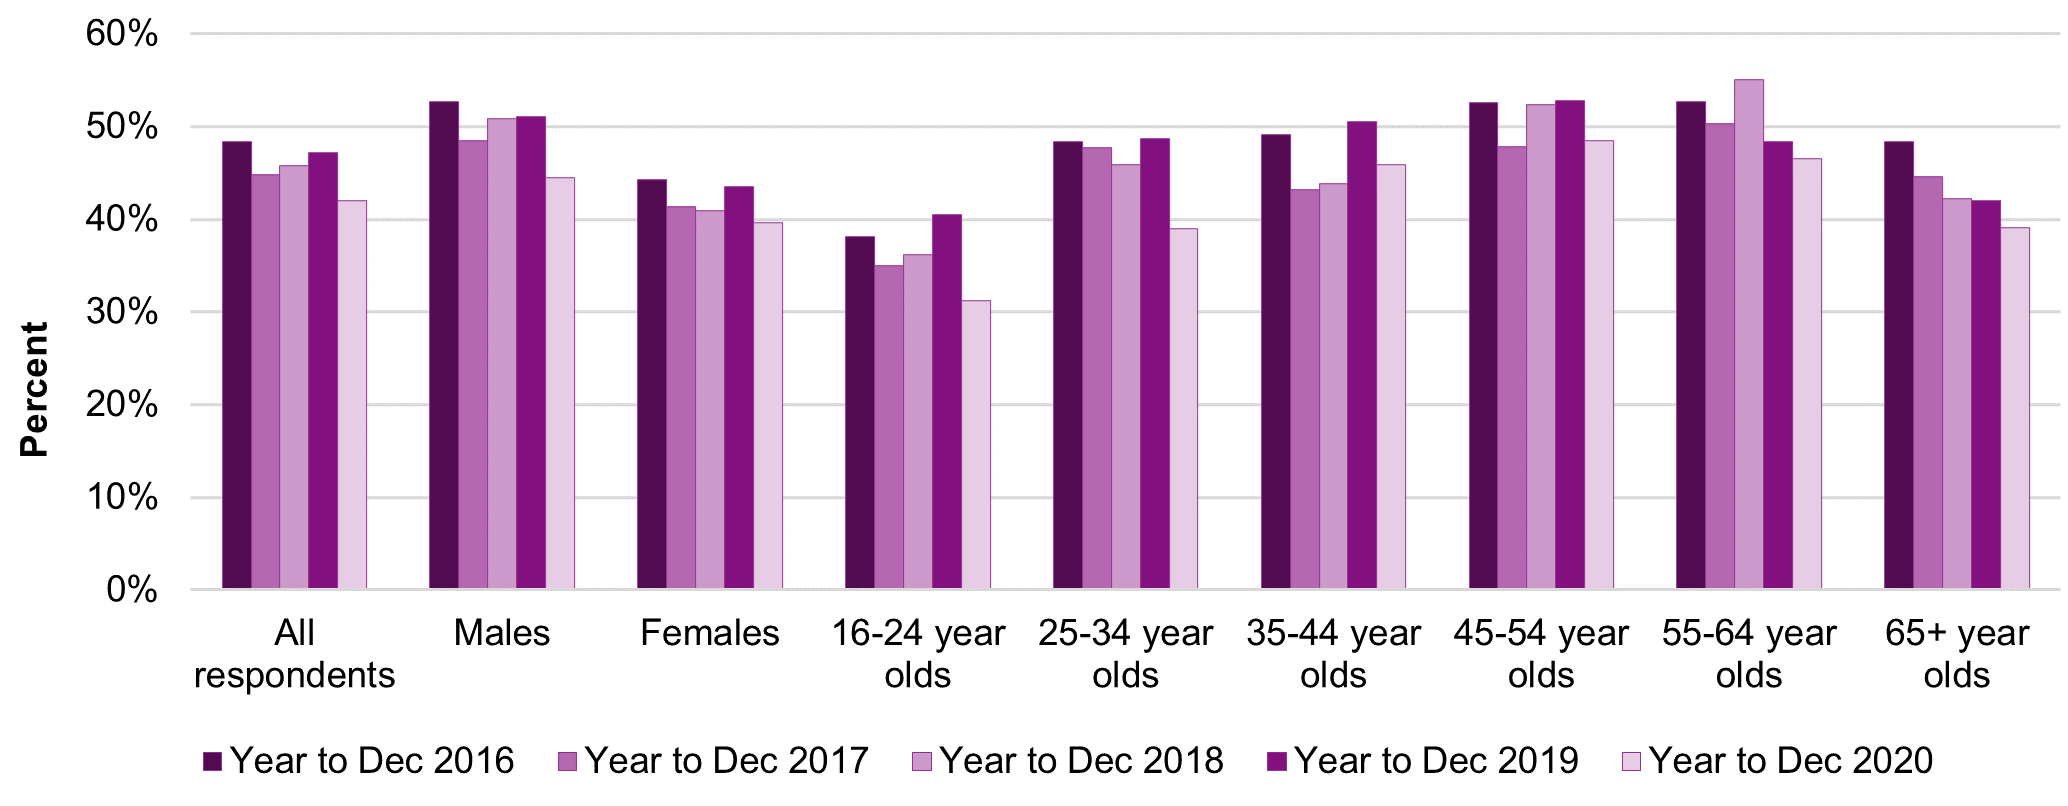 Figure 1 - Proportion of respondents participating in at least one form of gambling in the past four weeks, by gender and age